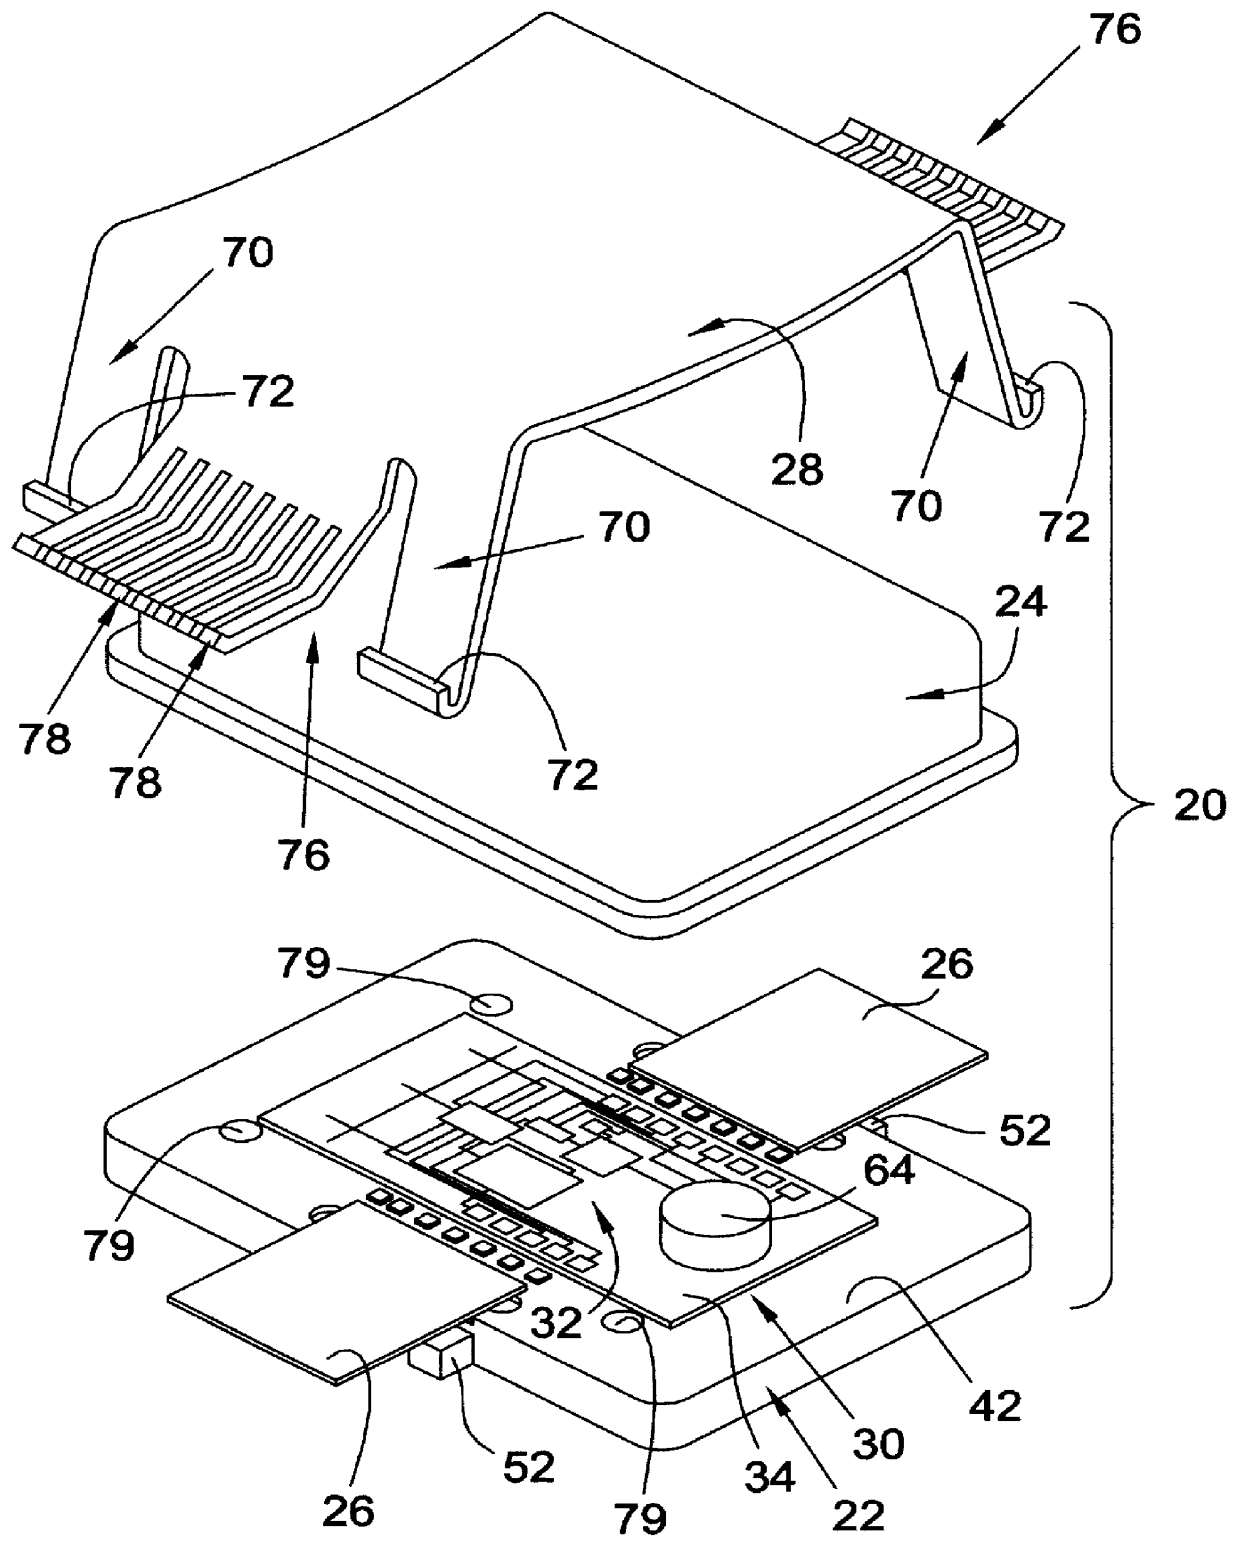 Millimeter wave module with an interconnect from an interior cavity